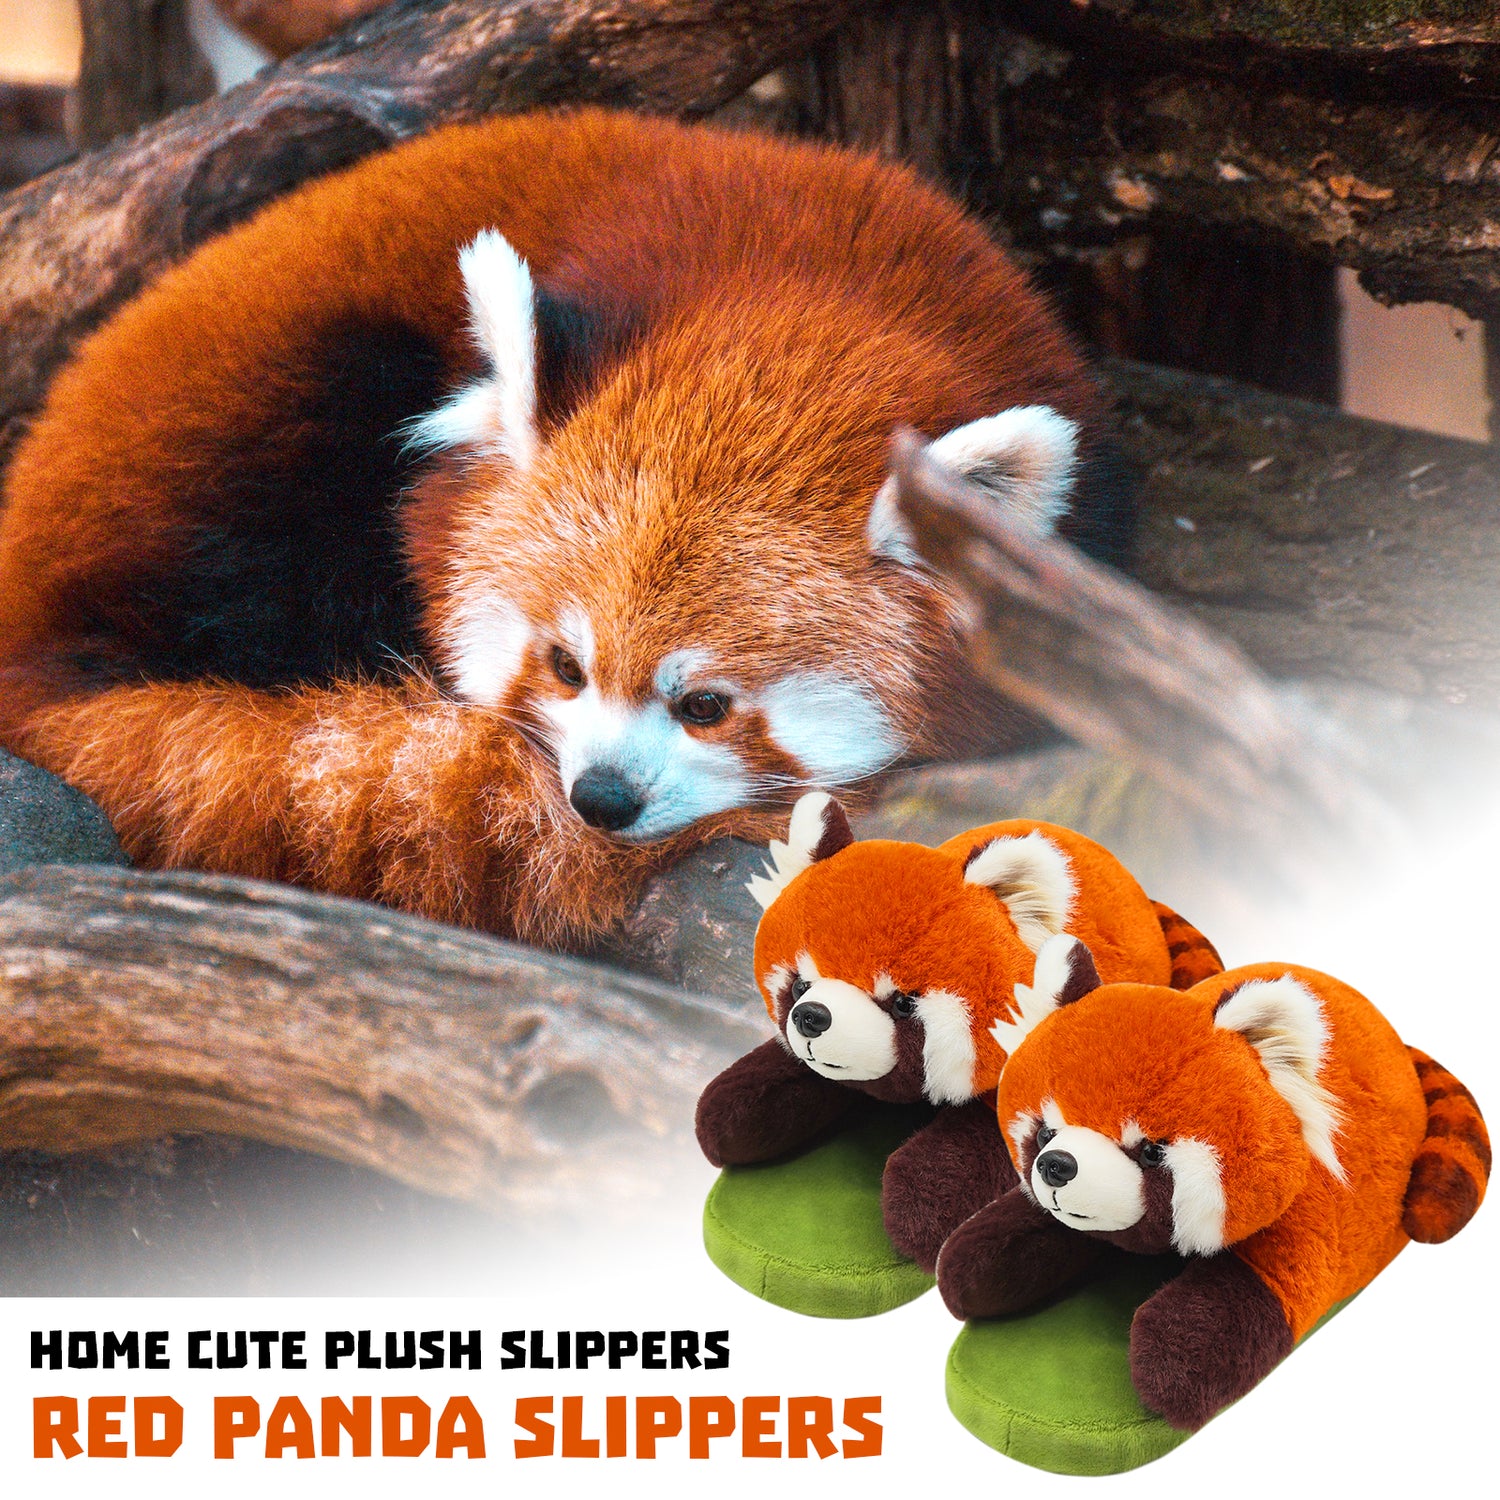 Red panda slippers let you embrace nature